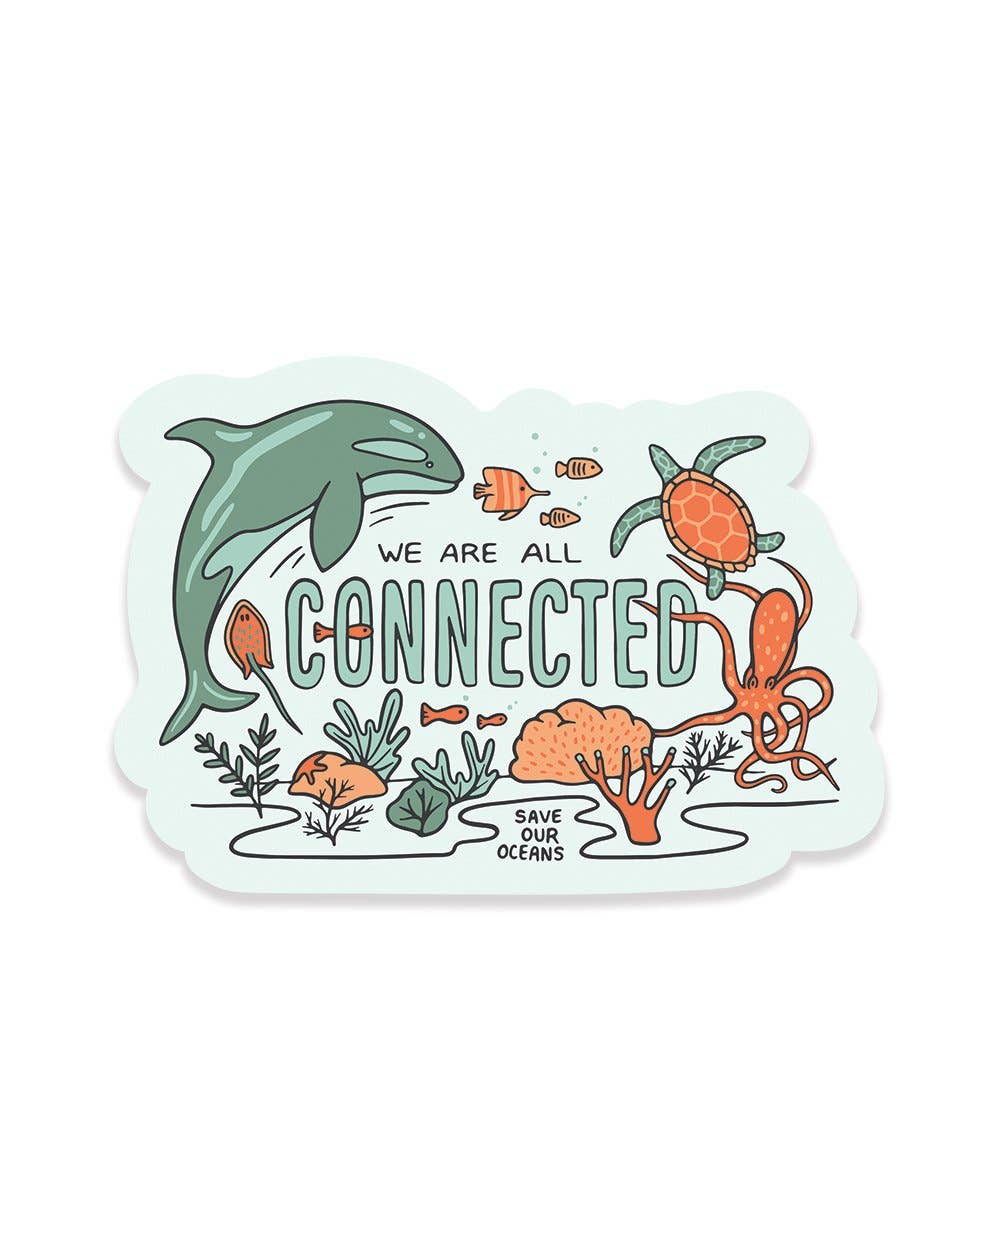 We are all connected ocean sticker by Keep Nature Wild